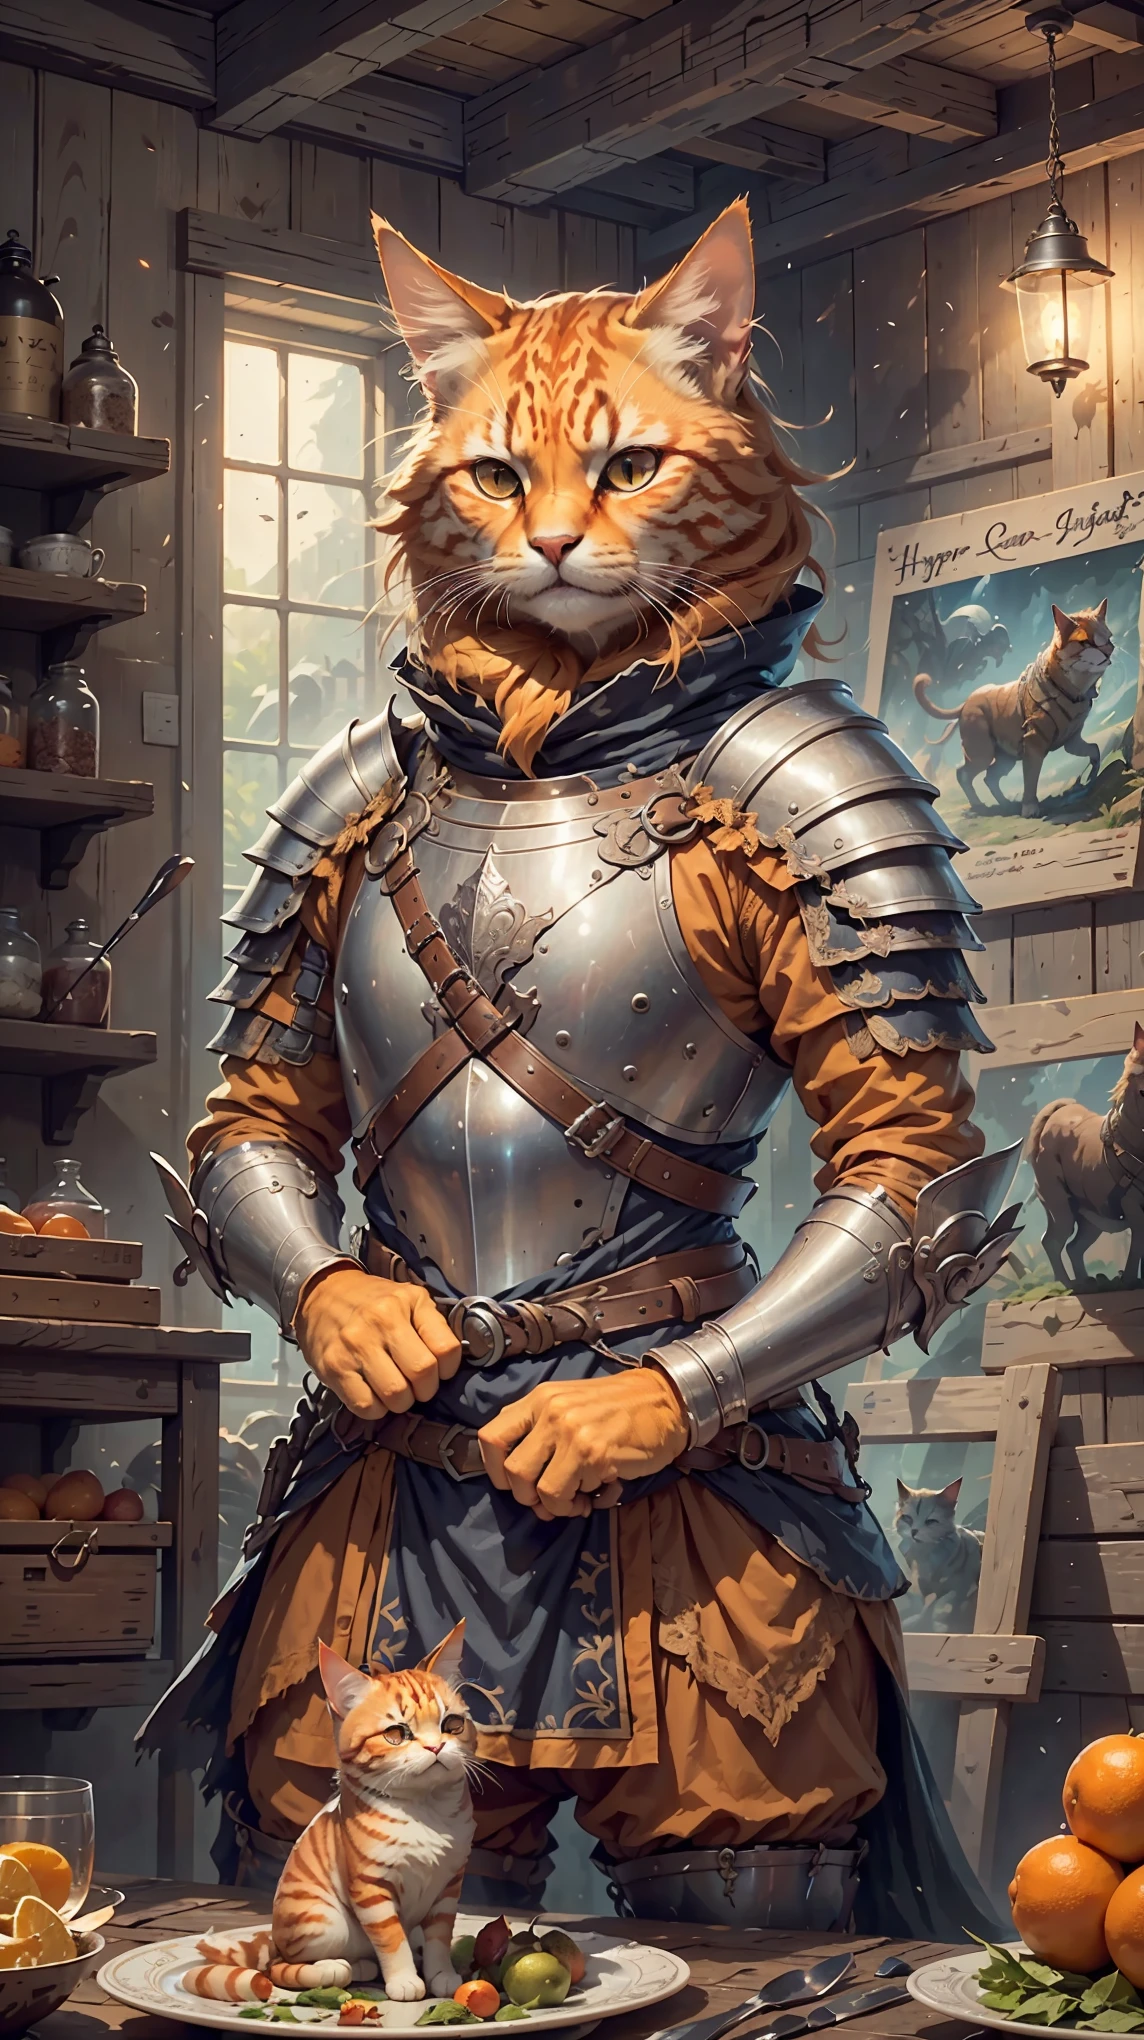 masterpiece, concept art, anthropomorphism, dynamic pose, orange cat wearing knight armor, full plate armor, cute, c4ttitude, medieval barrack interior, hyper realistic, intricate detail, epic composition, epic proportion, HD